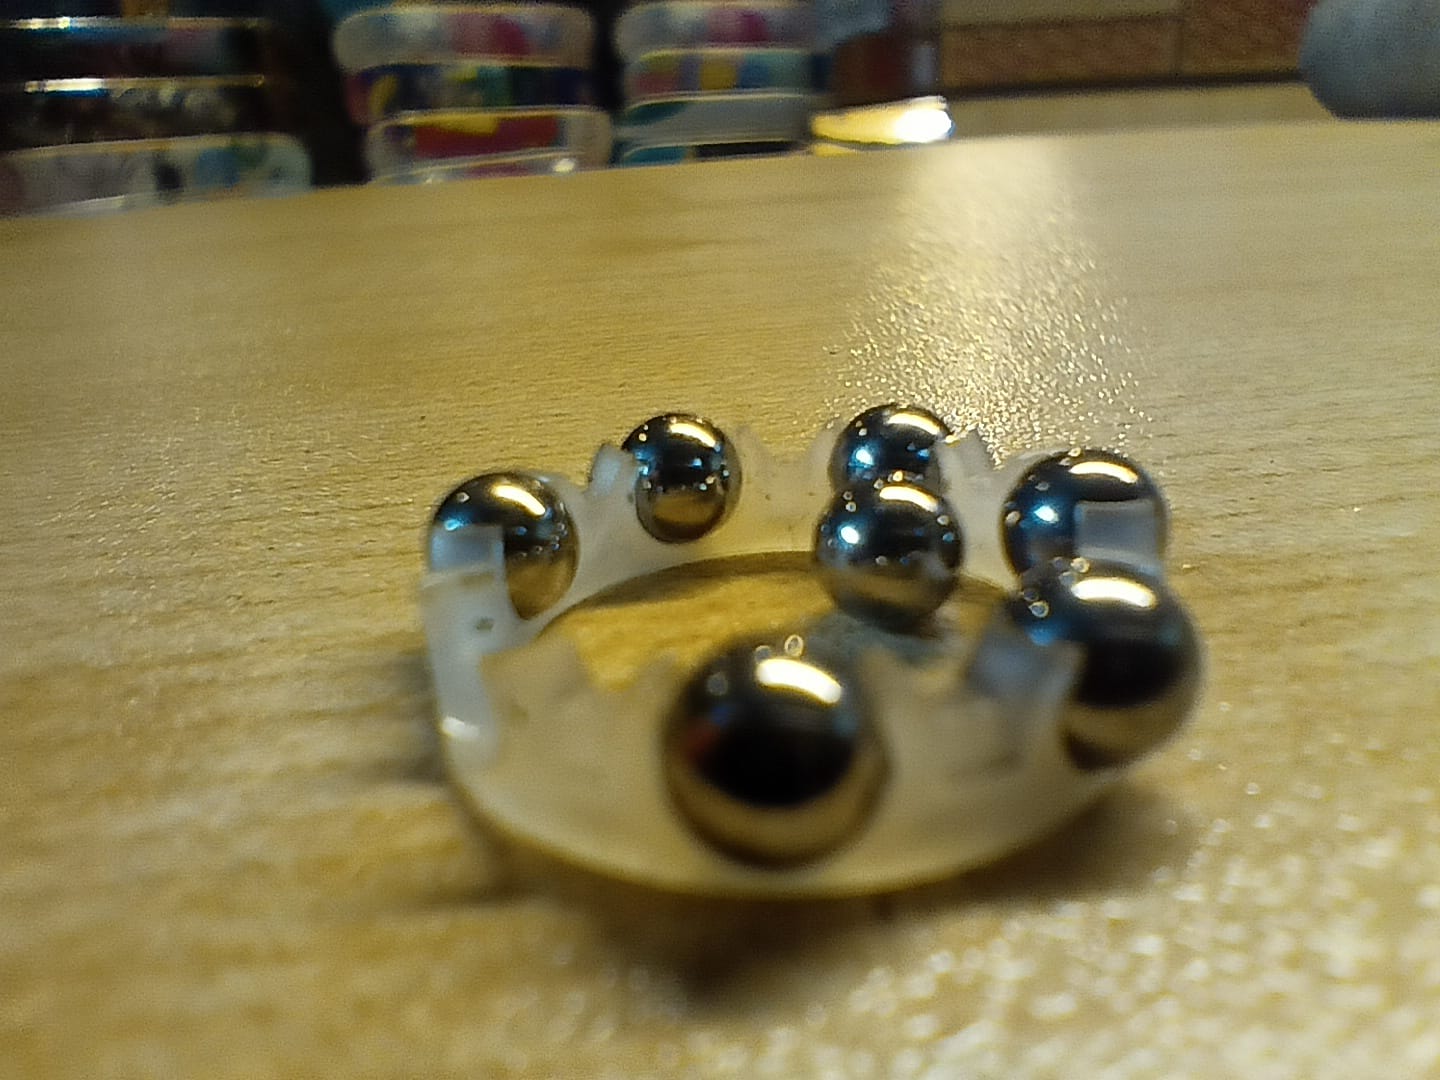 These bearings have nylon retainers to keep the balls evenly spaced around the racers.